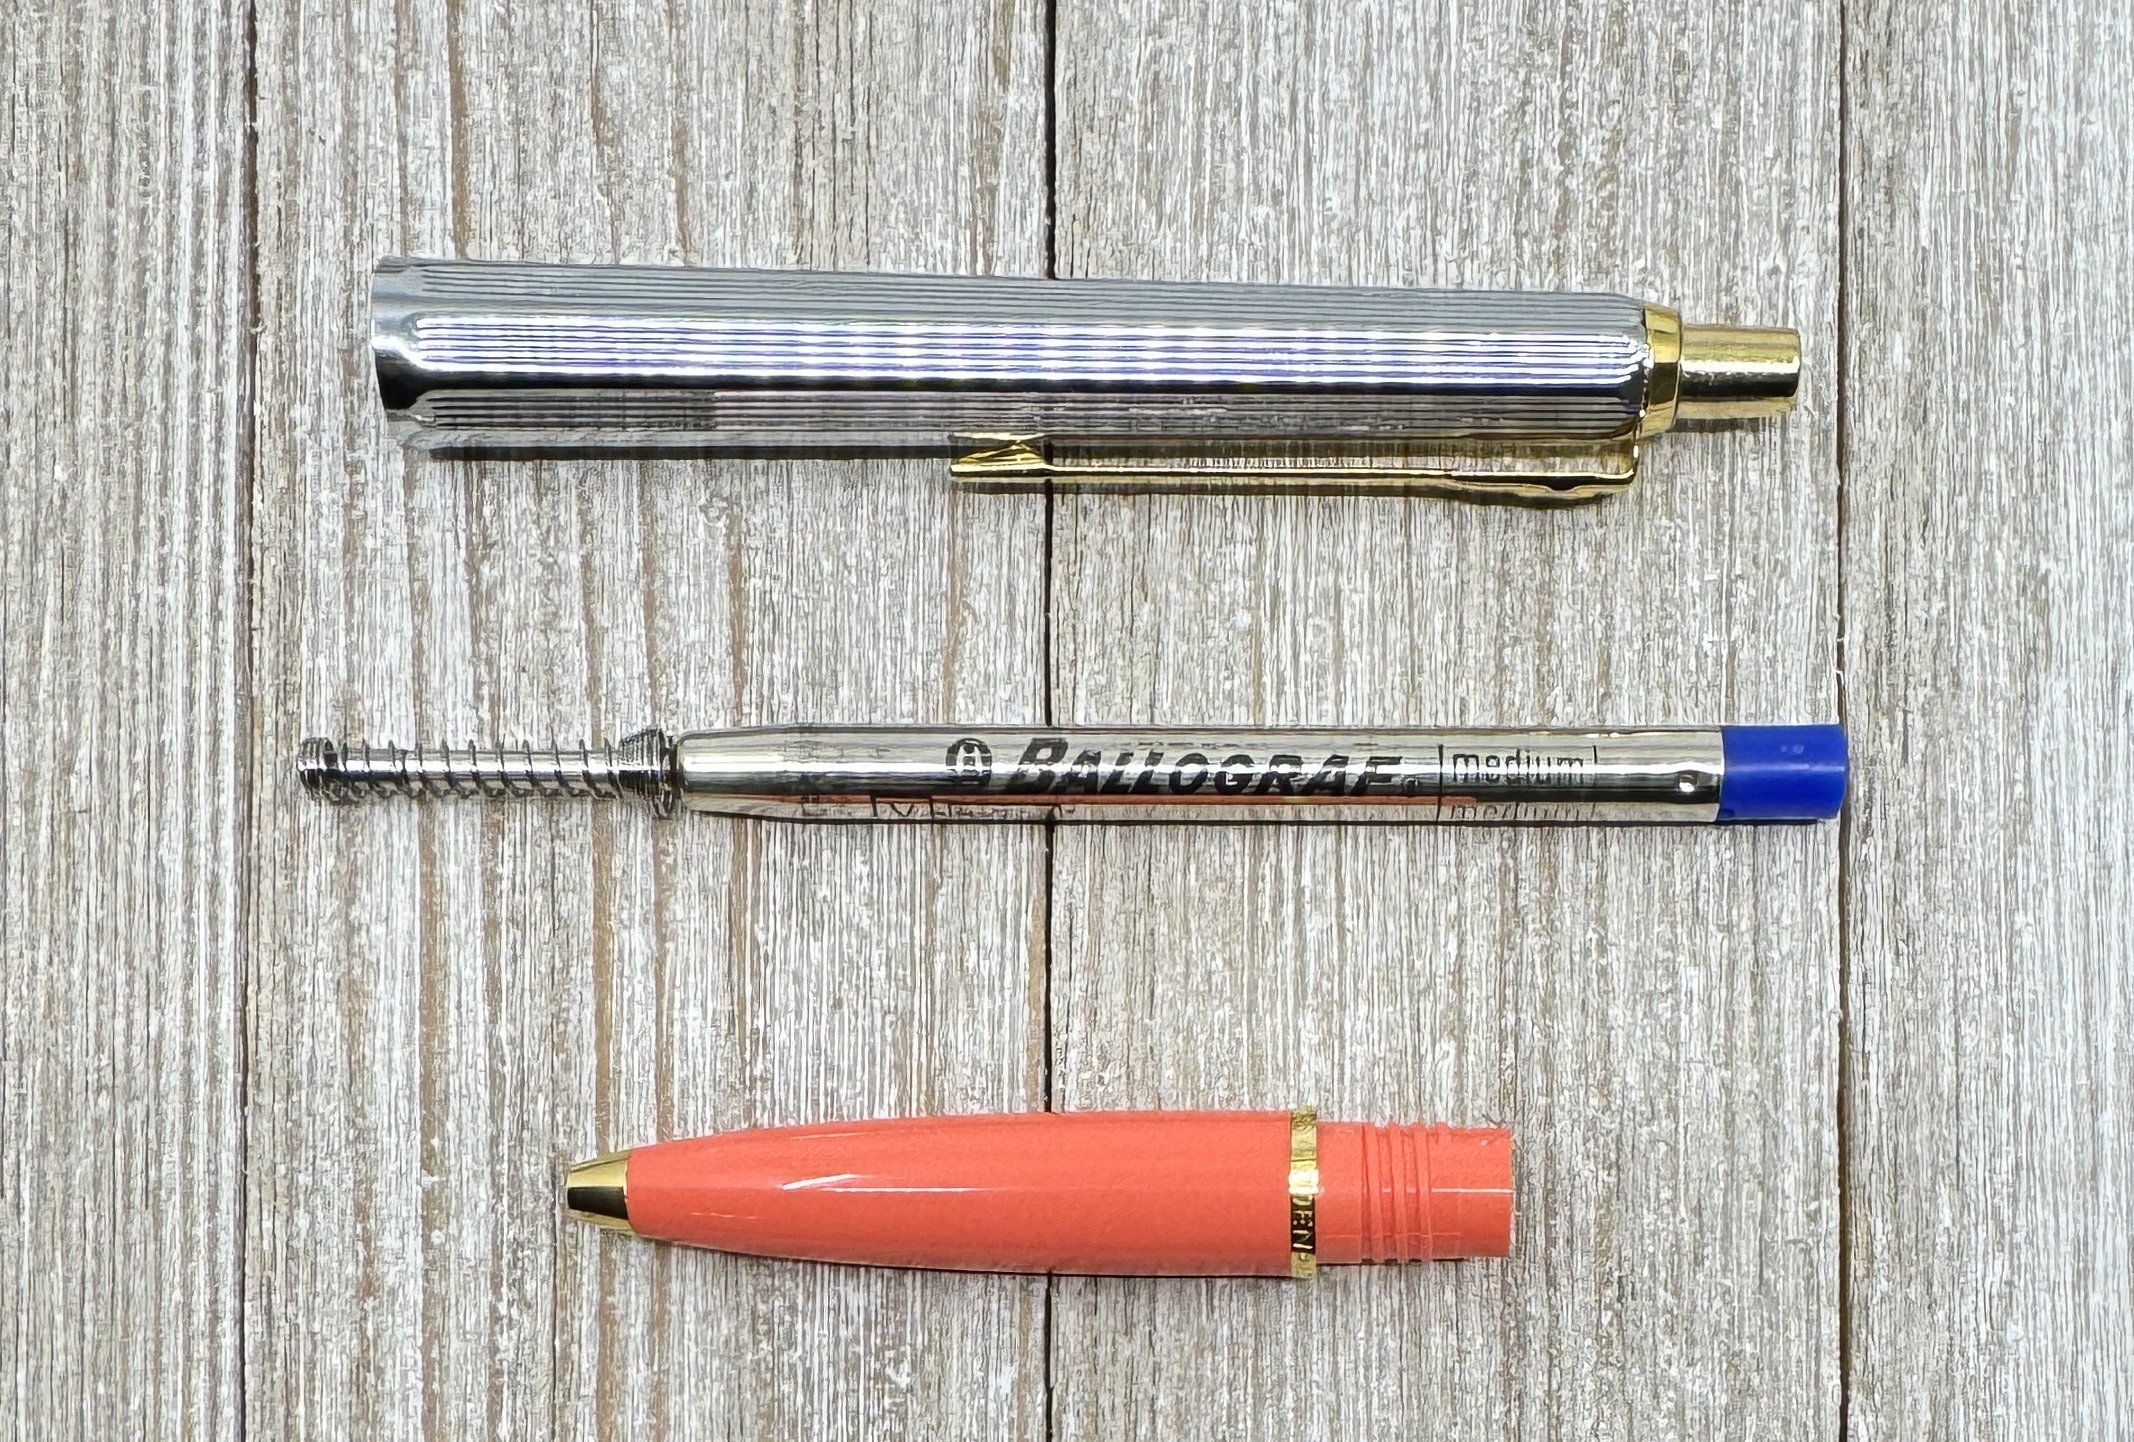 American Vintage Falcon Ruler / RAD AND HUNGRY